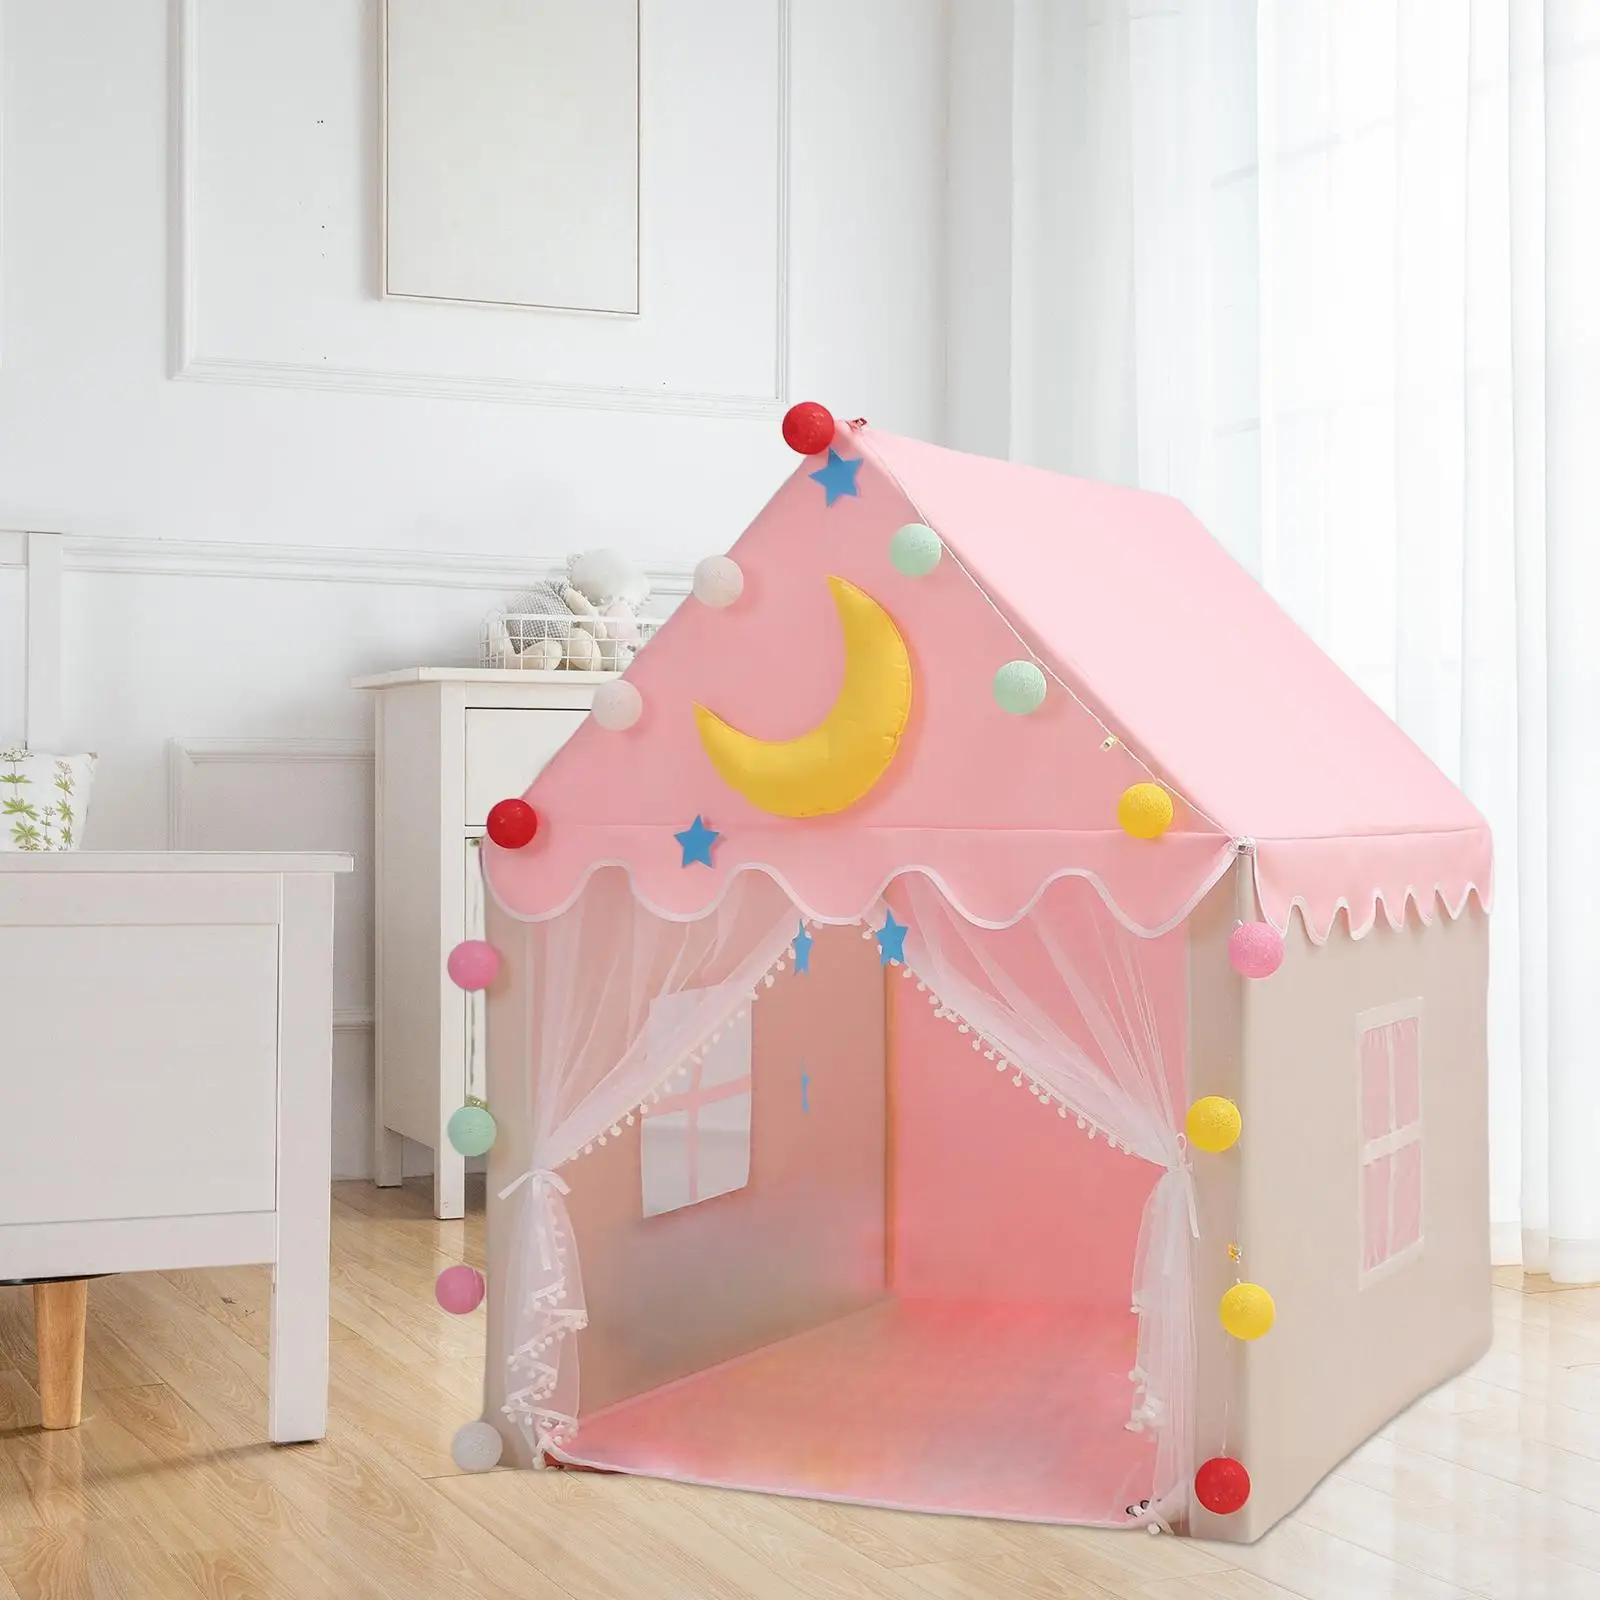 Playhouse Tent Toy Reading Tent Camping Playground Portable Indoor Outdoor Playhouse for Kids Girls Boys Toddlers Children